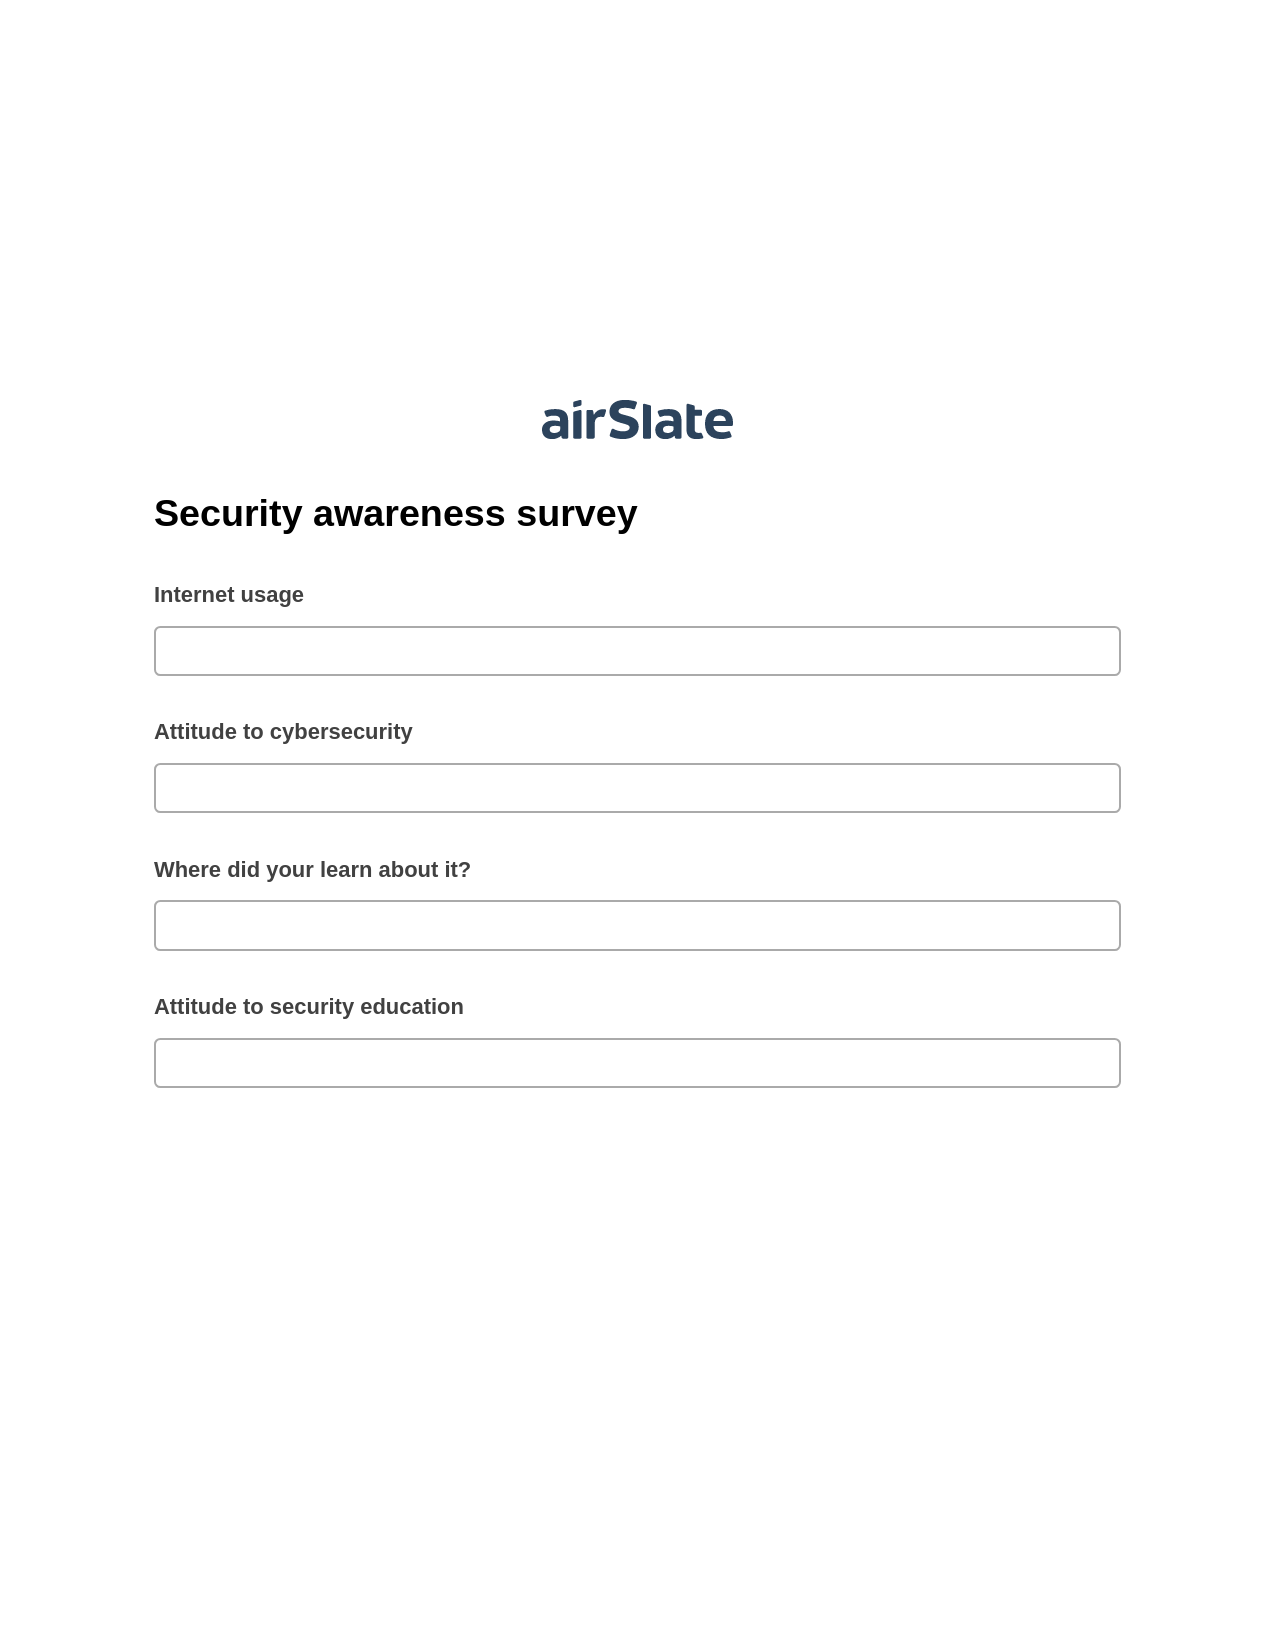 Security awareness survey Pre-fill from Salesforce Record Bot, Assign Roles to Recipients Bot, Export to Formstack Documents Bot